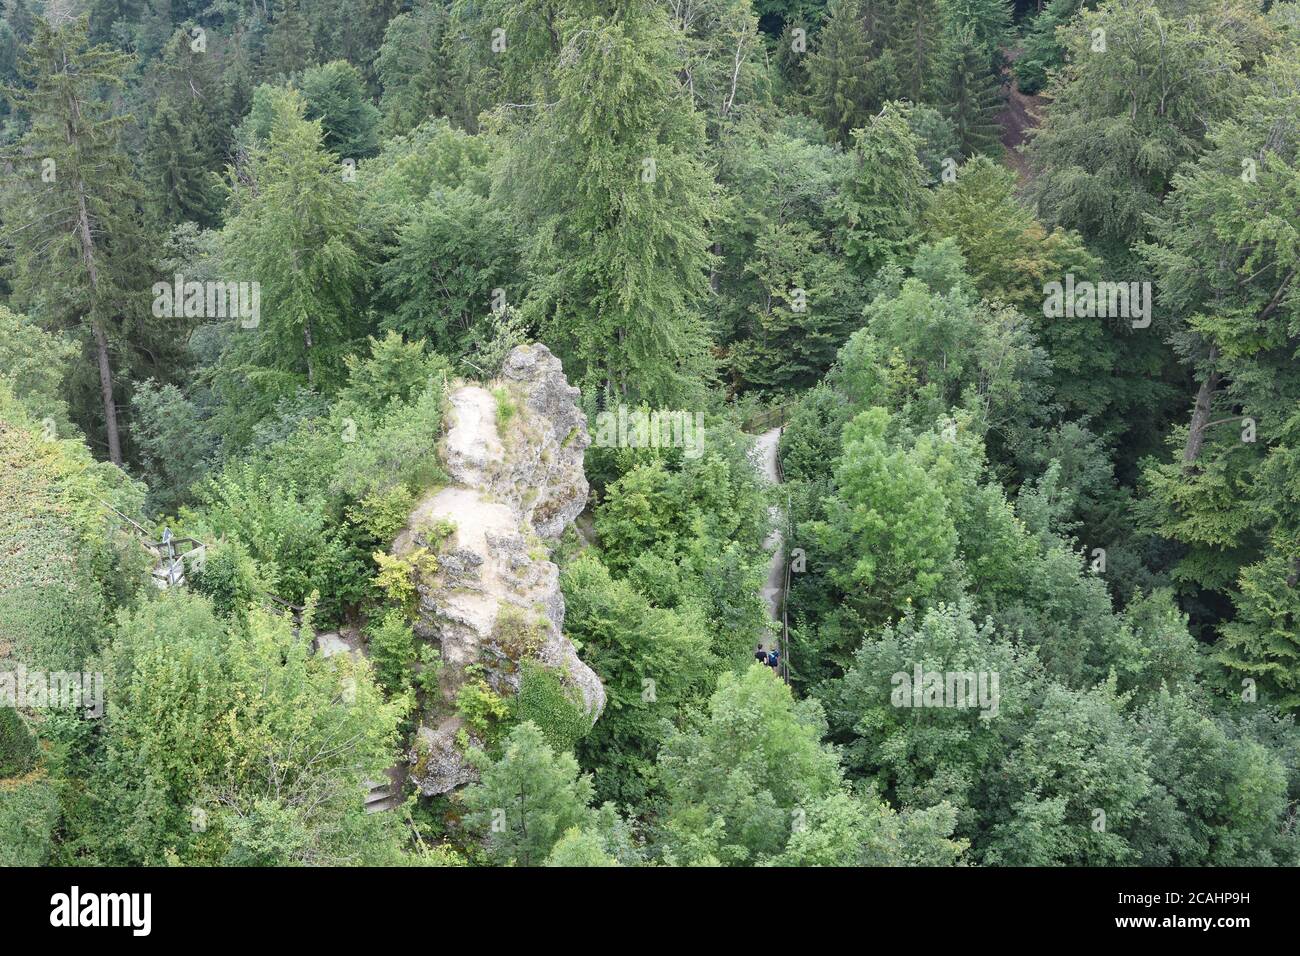 Bird's eye view on mixed green forest and rocks from Uto Kulm or Uetliberg mountain in Switzerland during sunny summer day. Stock Photo